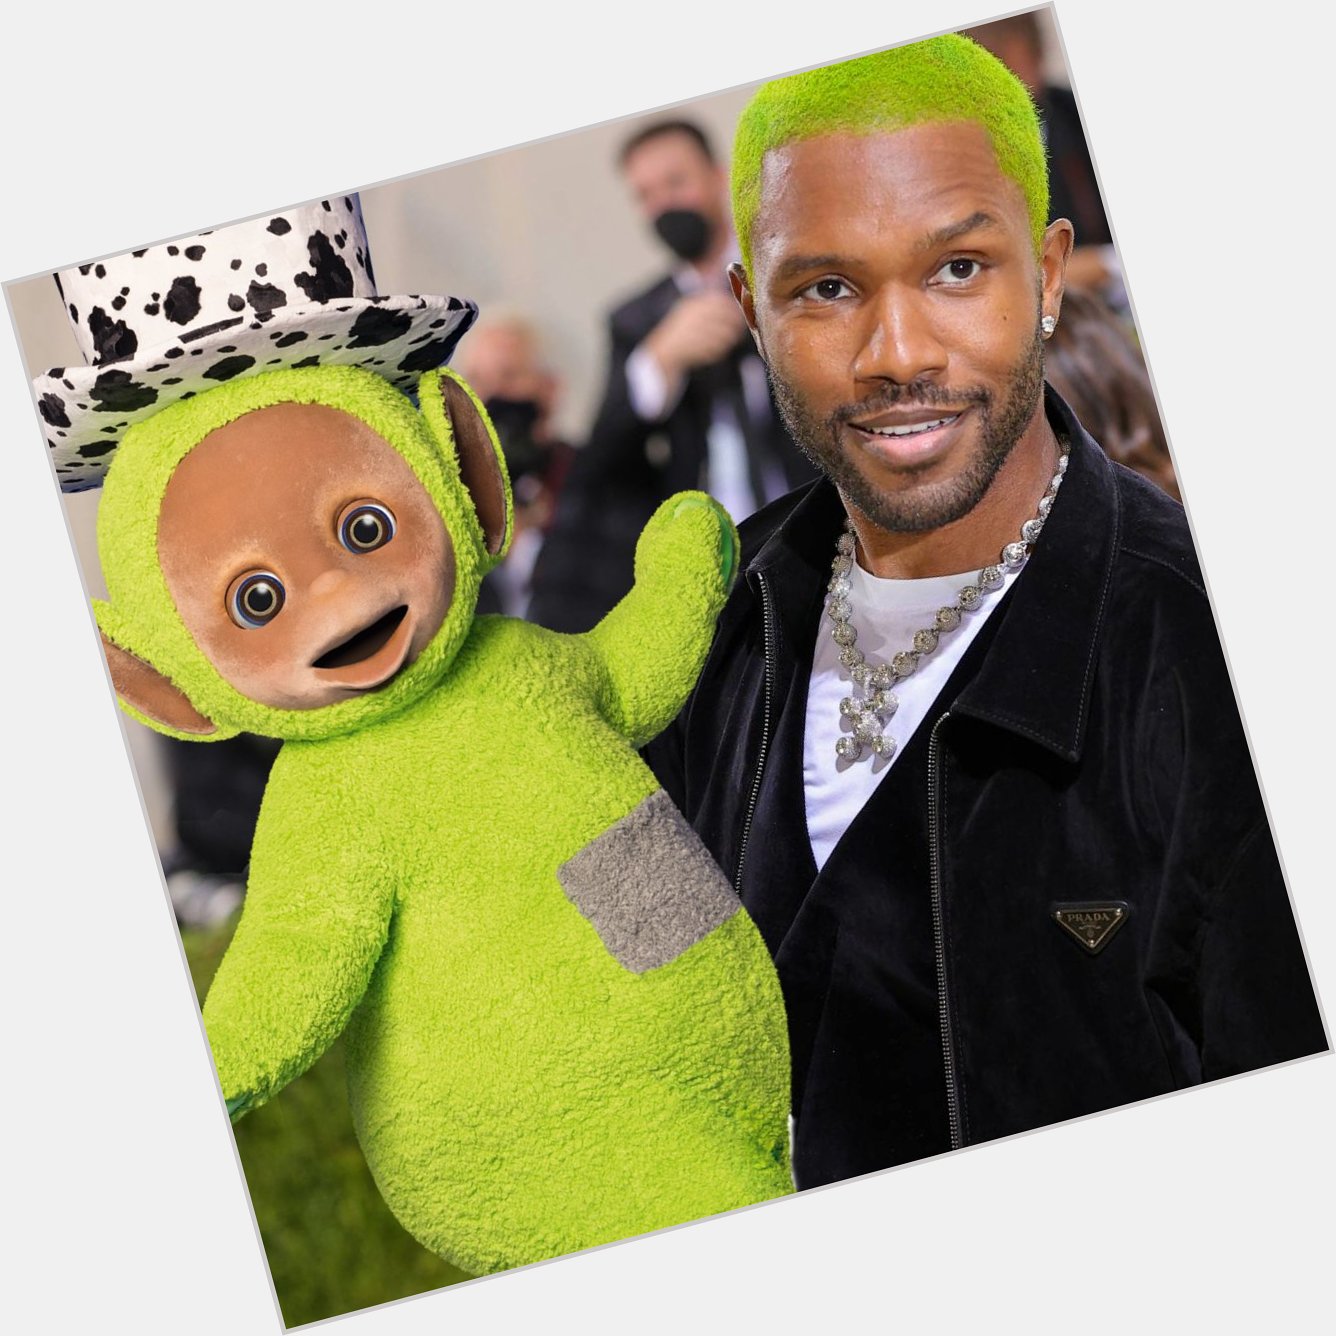 Happy Birthday Frank Ocean, we\ve been thinkin bout you and how much fun Dipsy had with you at the Met Gala 